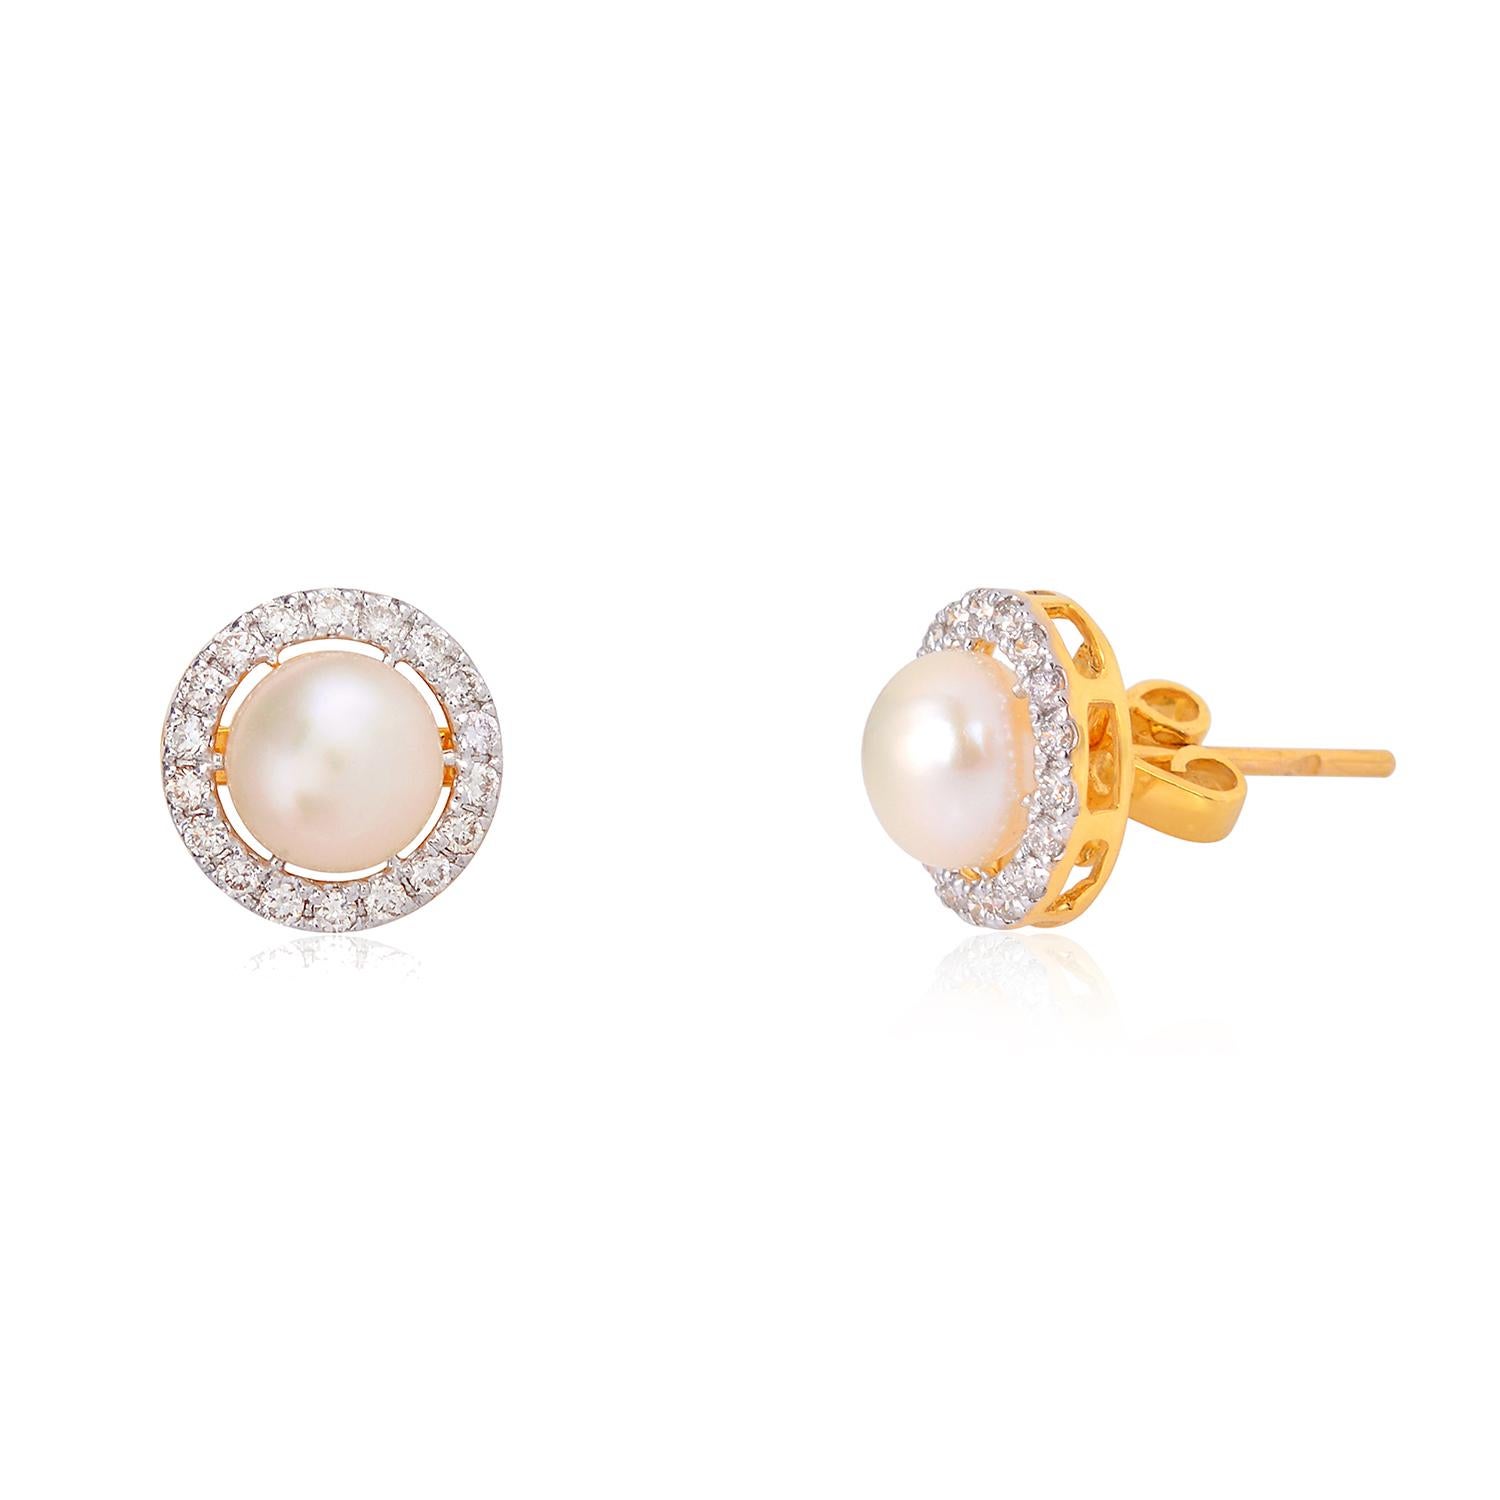 These earrings are made in 14k yellow gold . These earrings have a 14K gold and a freshwater pearl. The earrings are simple and perfect for gift to your friends and family.

Specifications:

Dimensions: 10*2 MM
Gross Weight: 2.40 gms
Gold Weight: